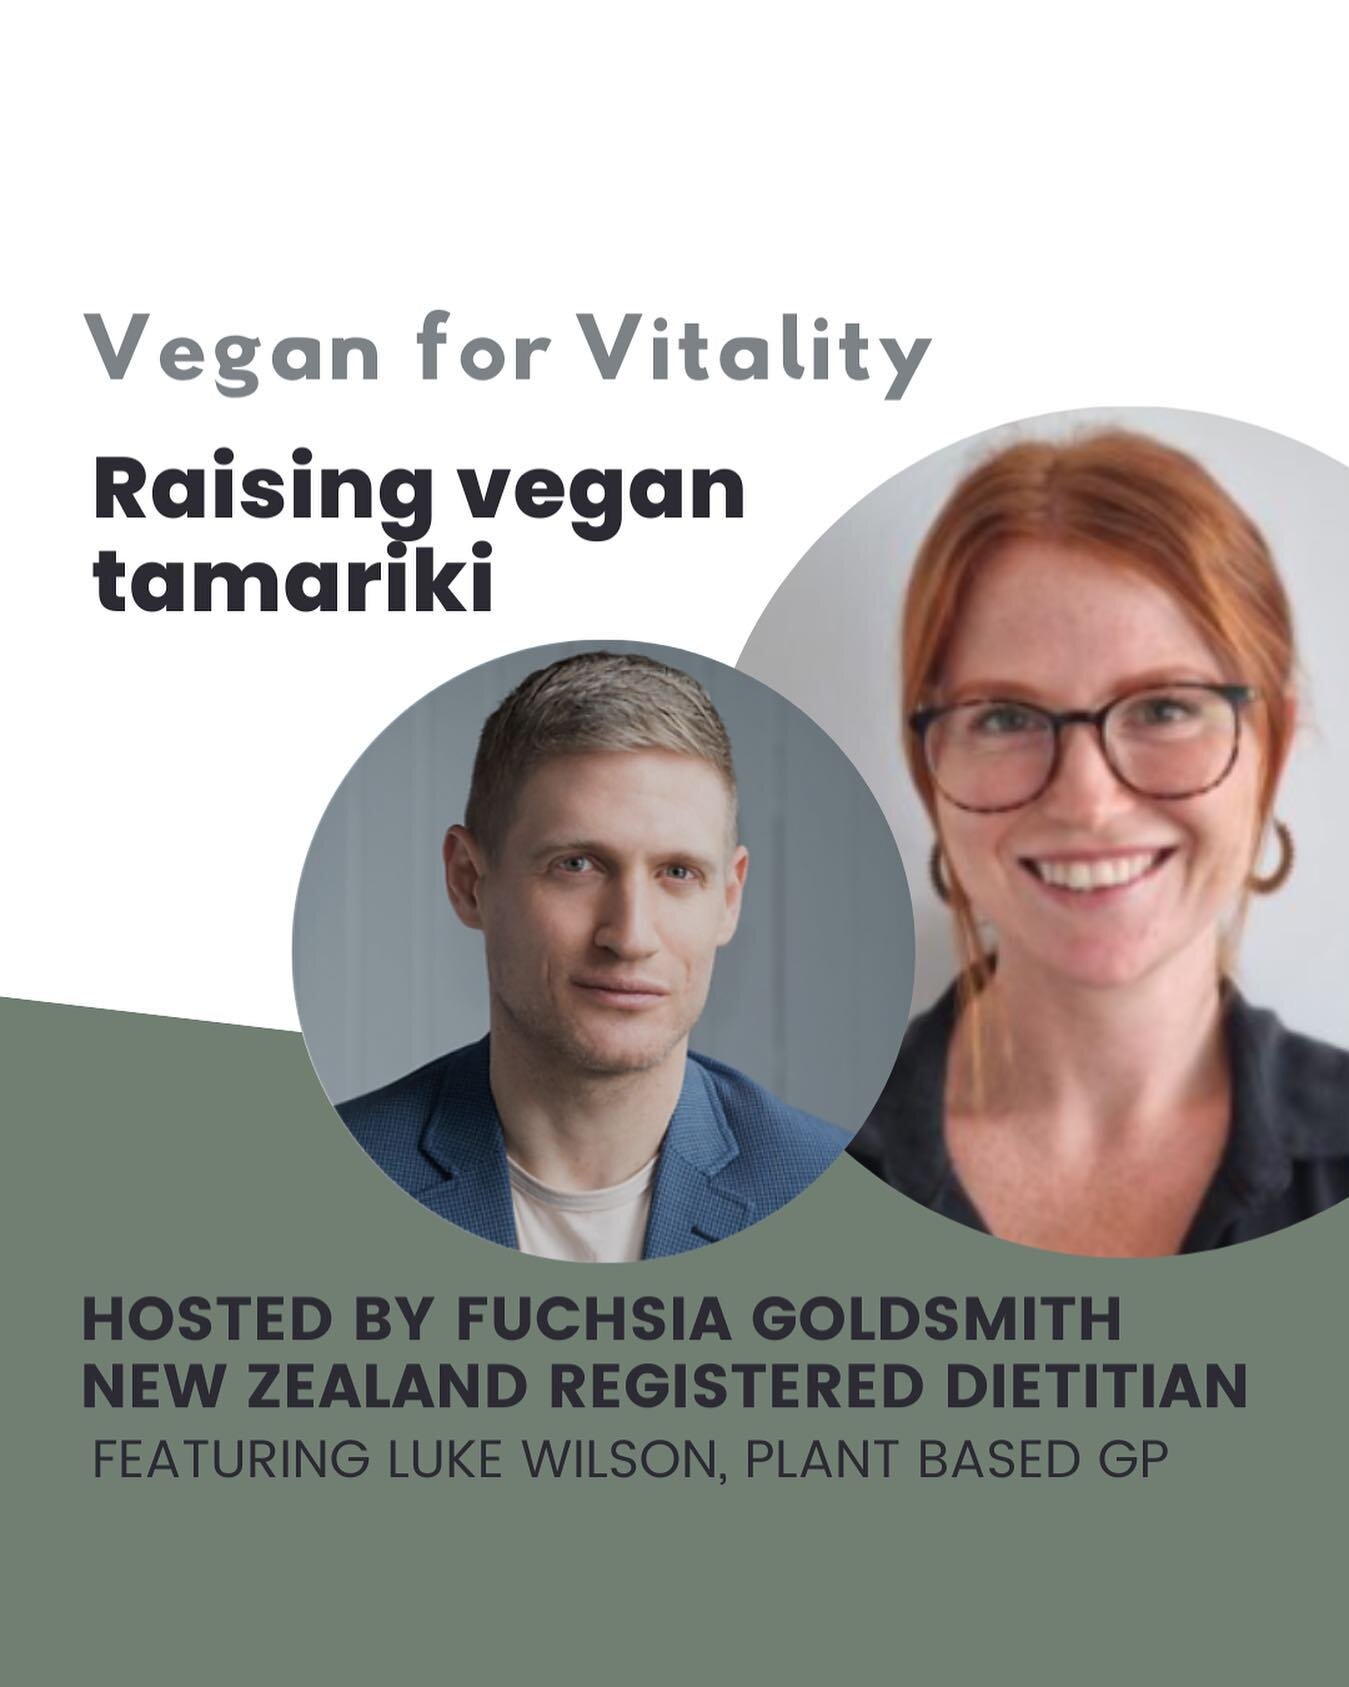 🌱👋 We're excited to announce that our next Vegan for Vitality: Monthly Live will be all about raising vegan tamariki. This topic was the top choice in our recent poll, so we can&rsquo;t wait to share our knowledge in this space. 

👉 Dr. Luke and I